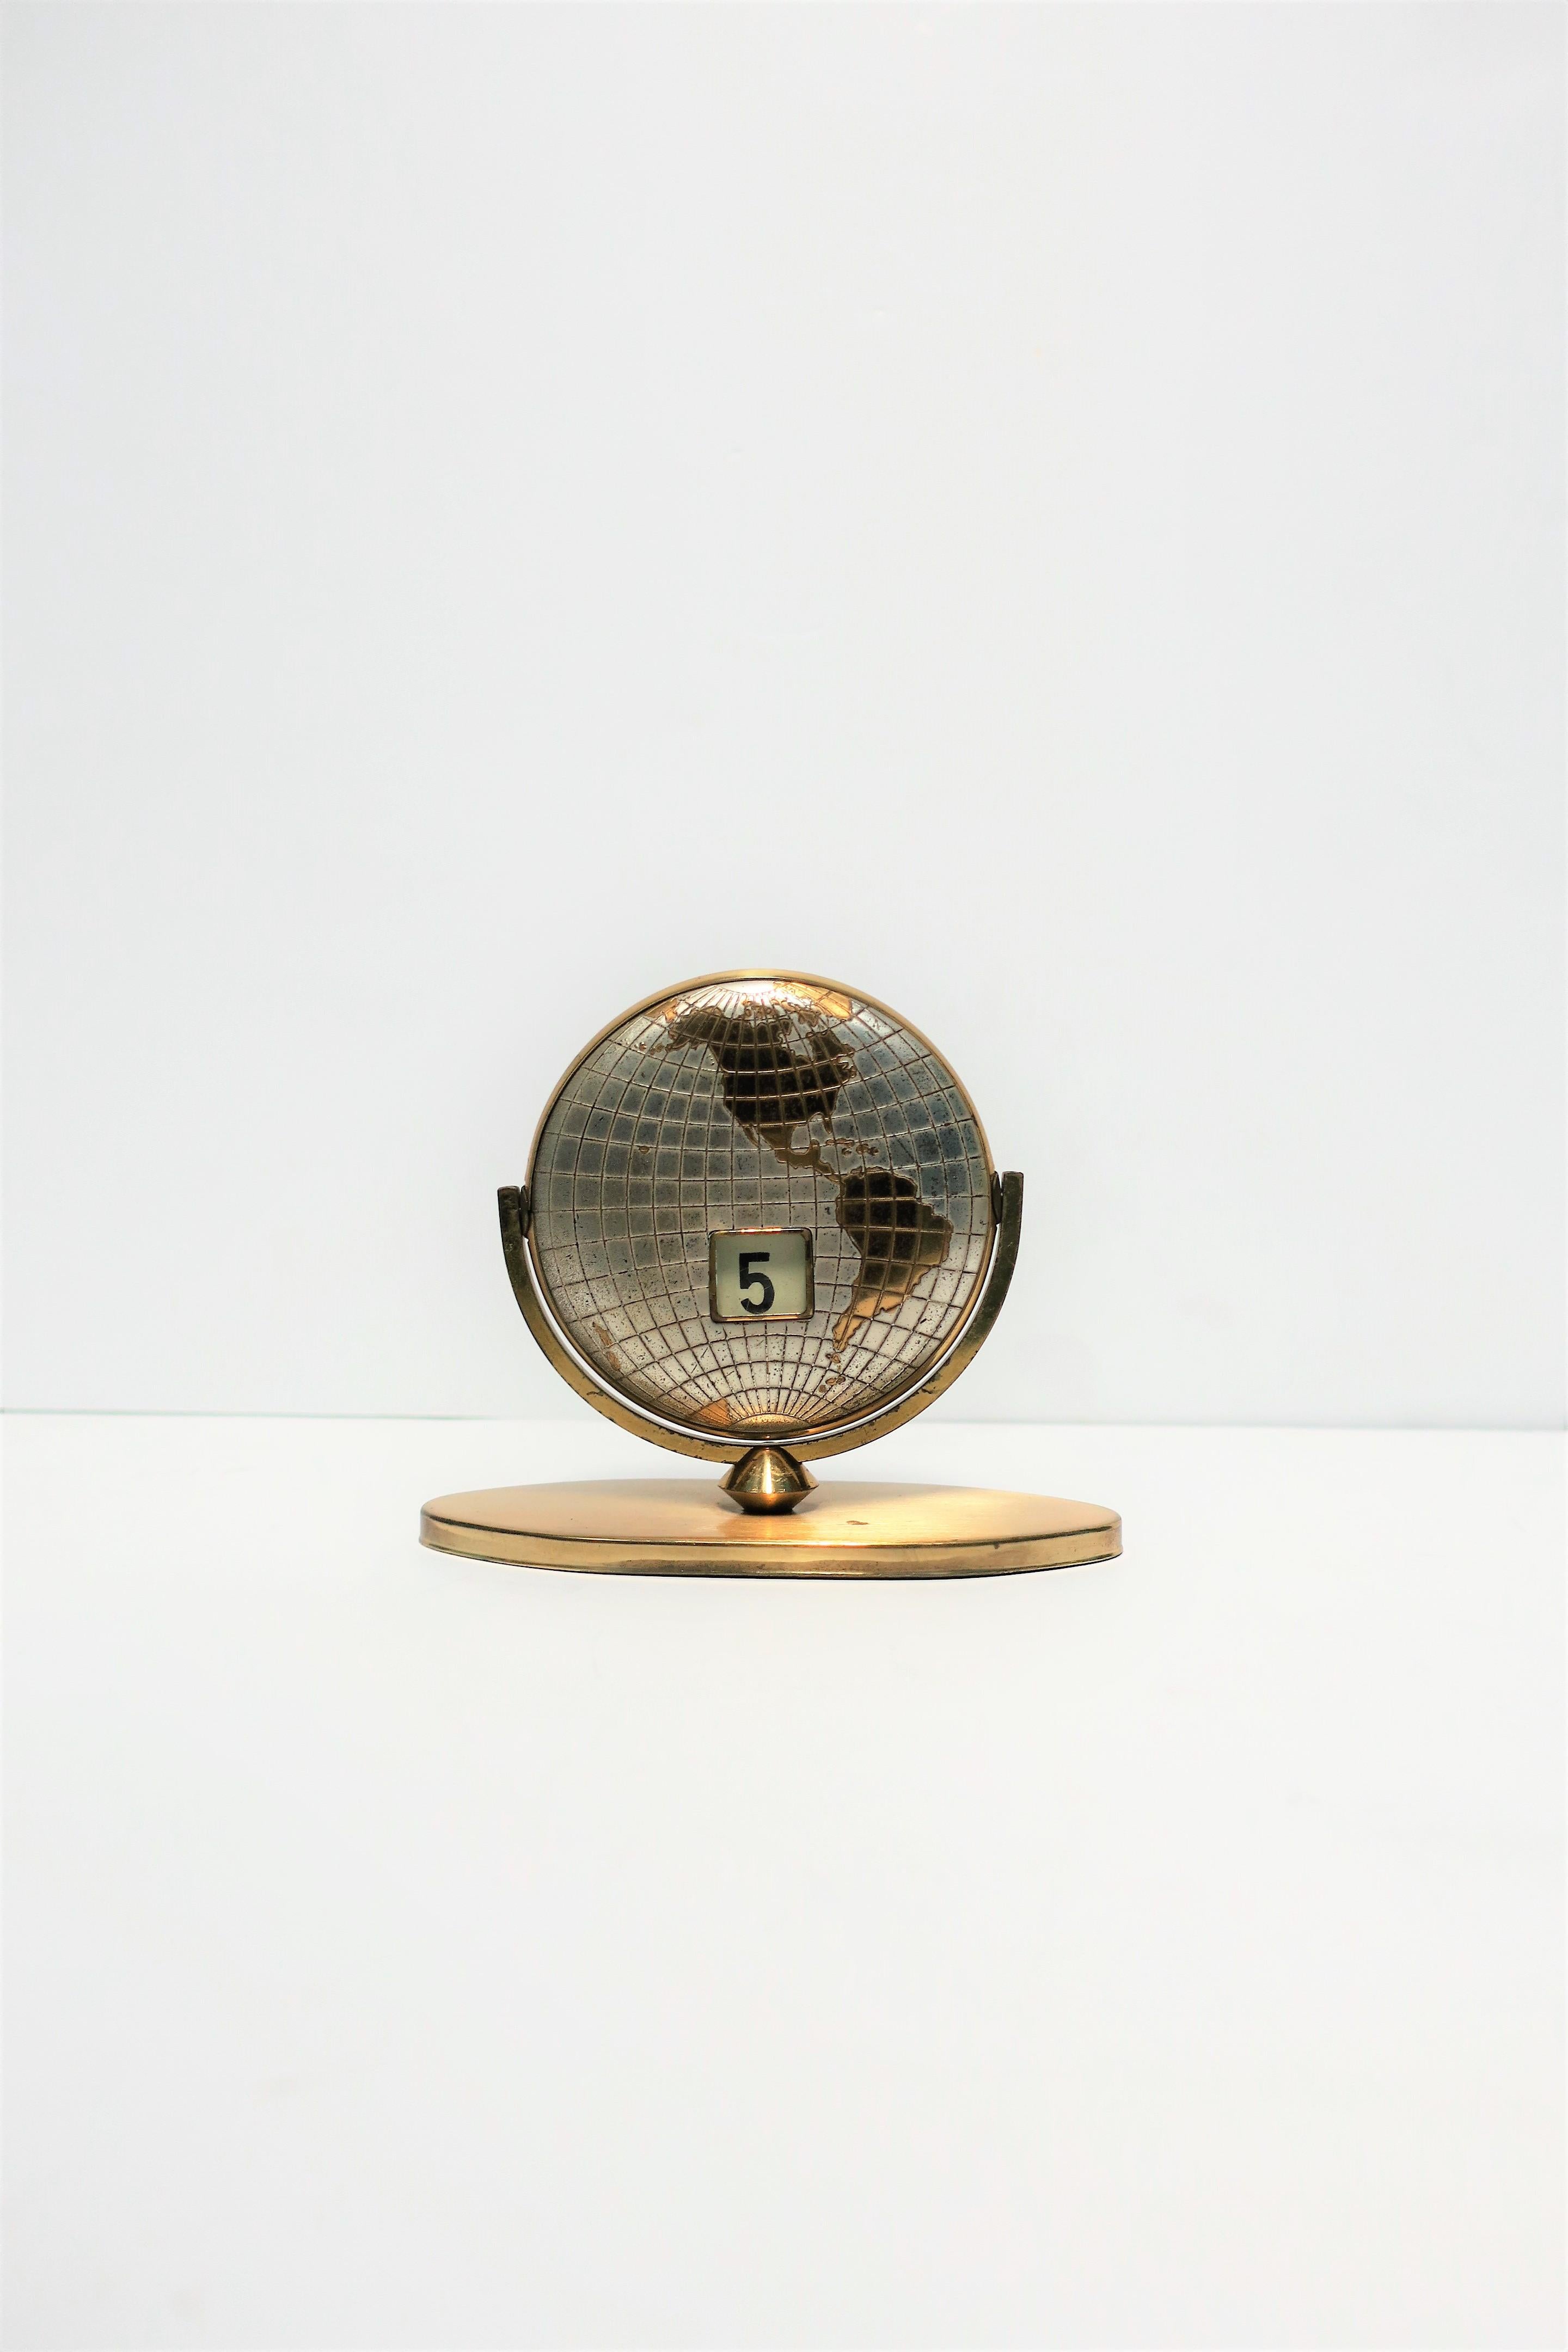 A Midcentury Modern brass and chrome world globe desk calendar, circa 1960s. Date changes by turning/flipping globe. Date on both sides. In fine working order. 

Piece measures: 5.25